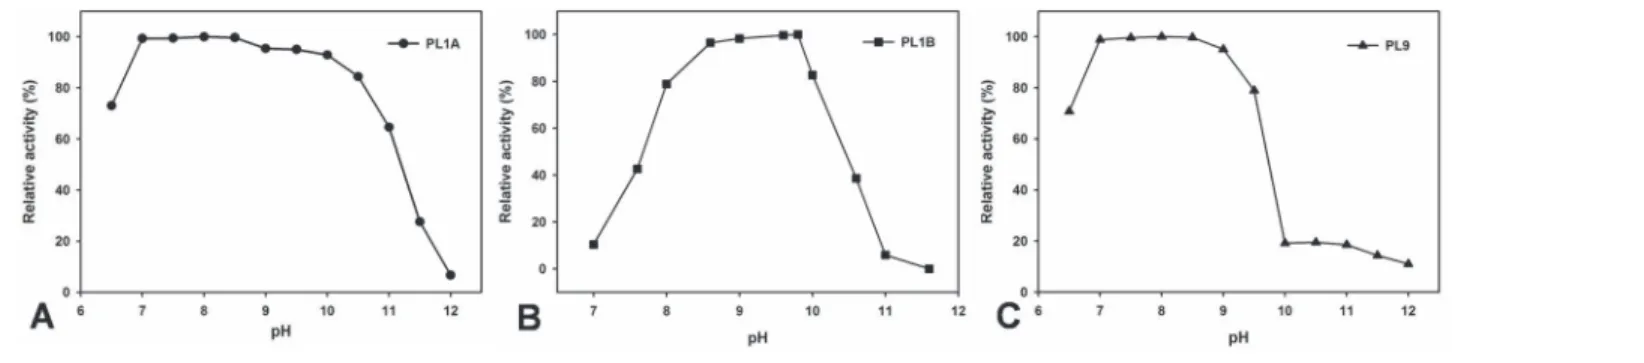 Figure 5. Effect of pH on the activity of (A) PL1A; (B) PL1B; (C) PL9 towards PGA as substrate.